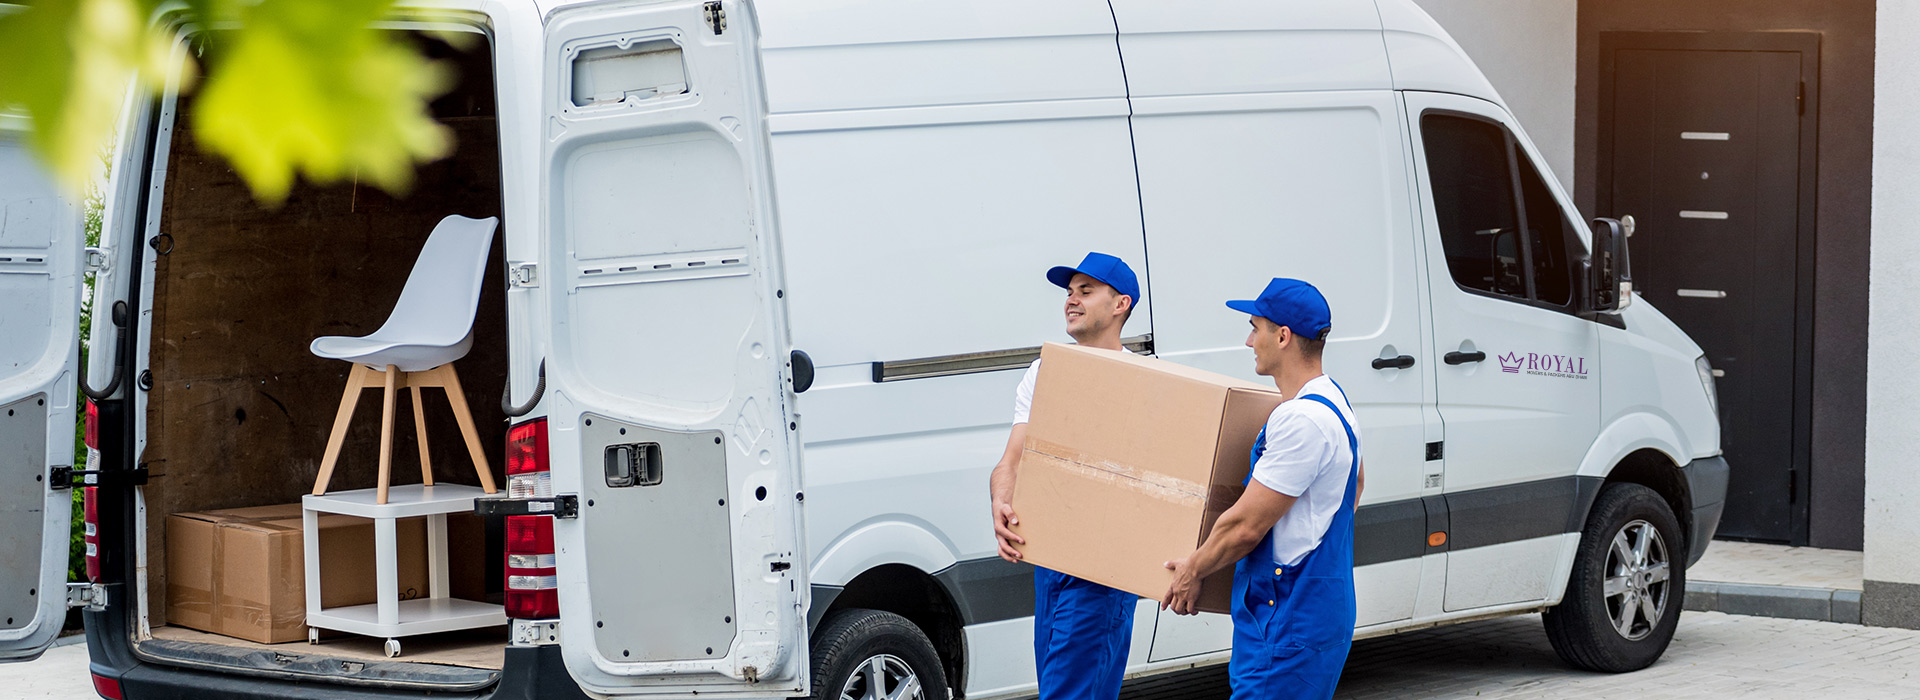 Movers and Packers Abu Dhabi | International Movers in Abu Dhabi